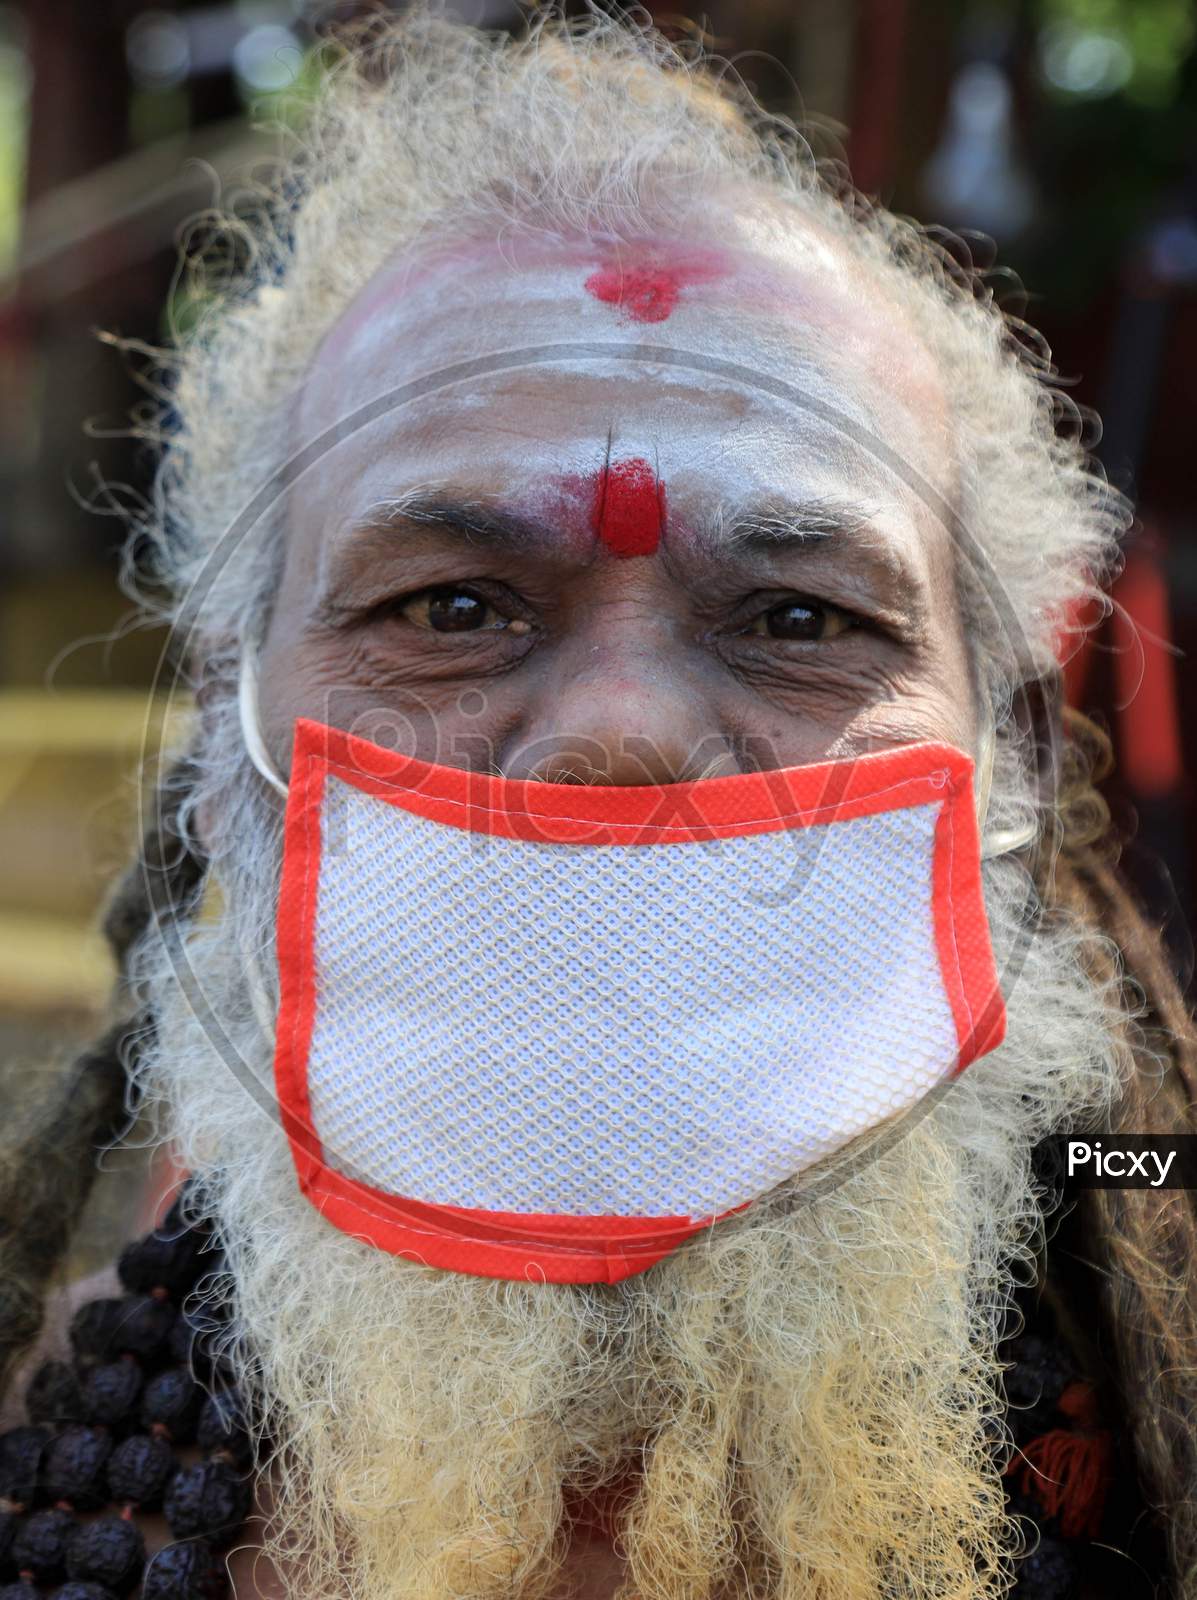 A sadhu wears a face mask to spread awareness among people against COVID-19 during government imposed nationwide lockdown as a preventive measure against the COVID-19 coronavirus in Prayagraj, April 28, 2020.